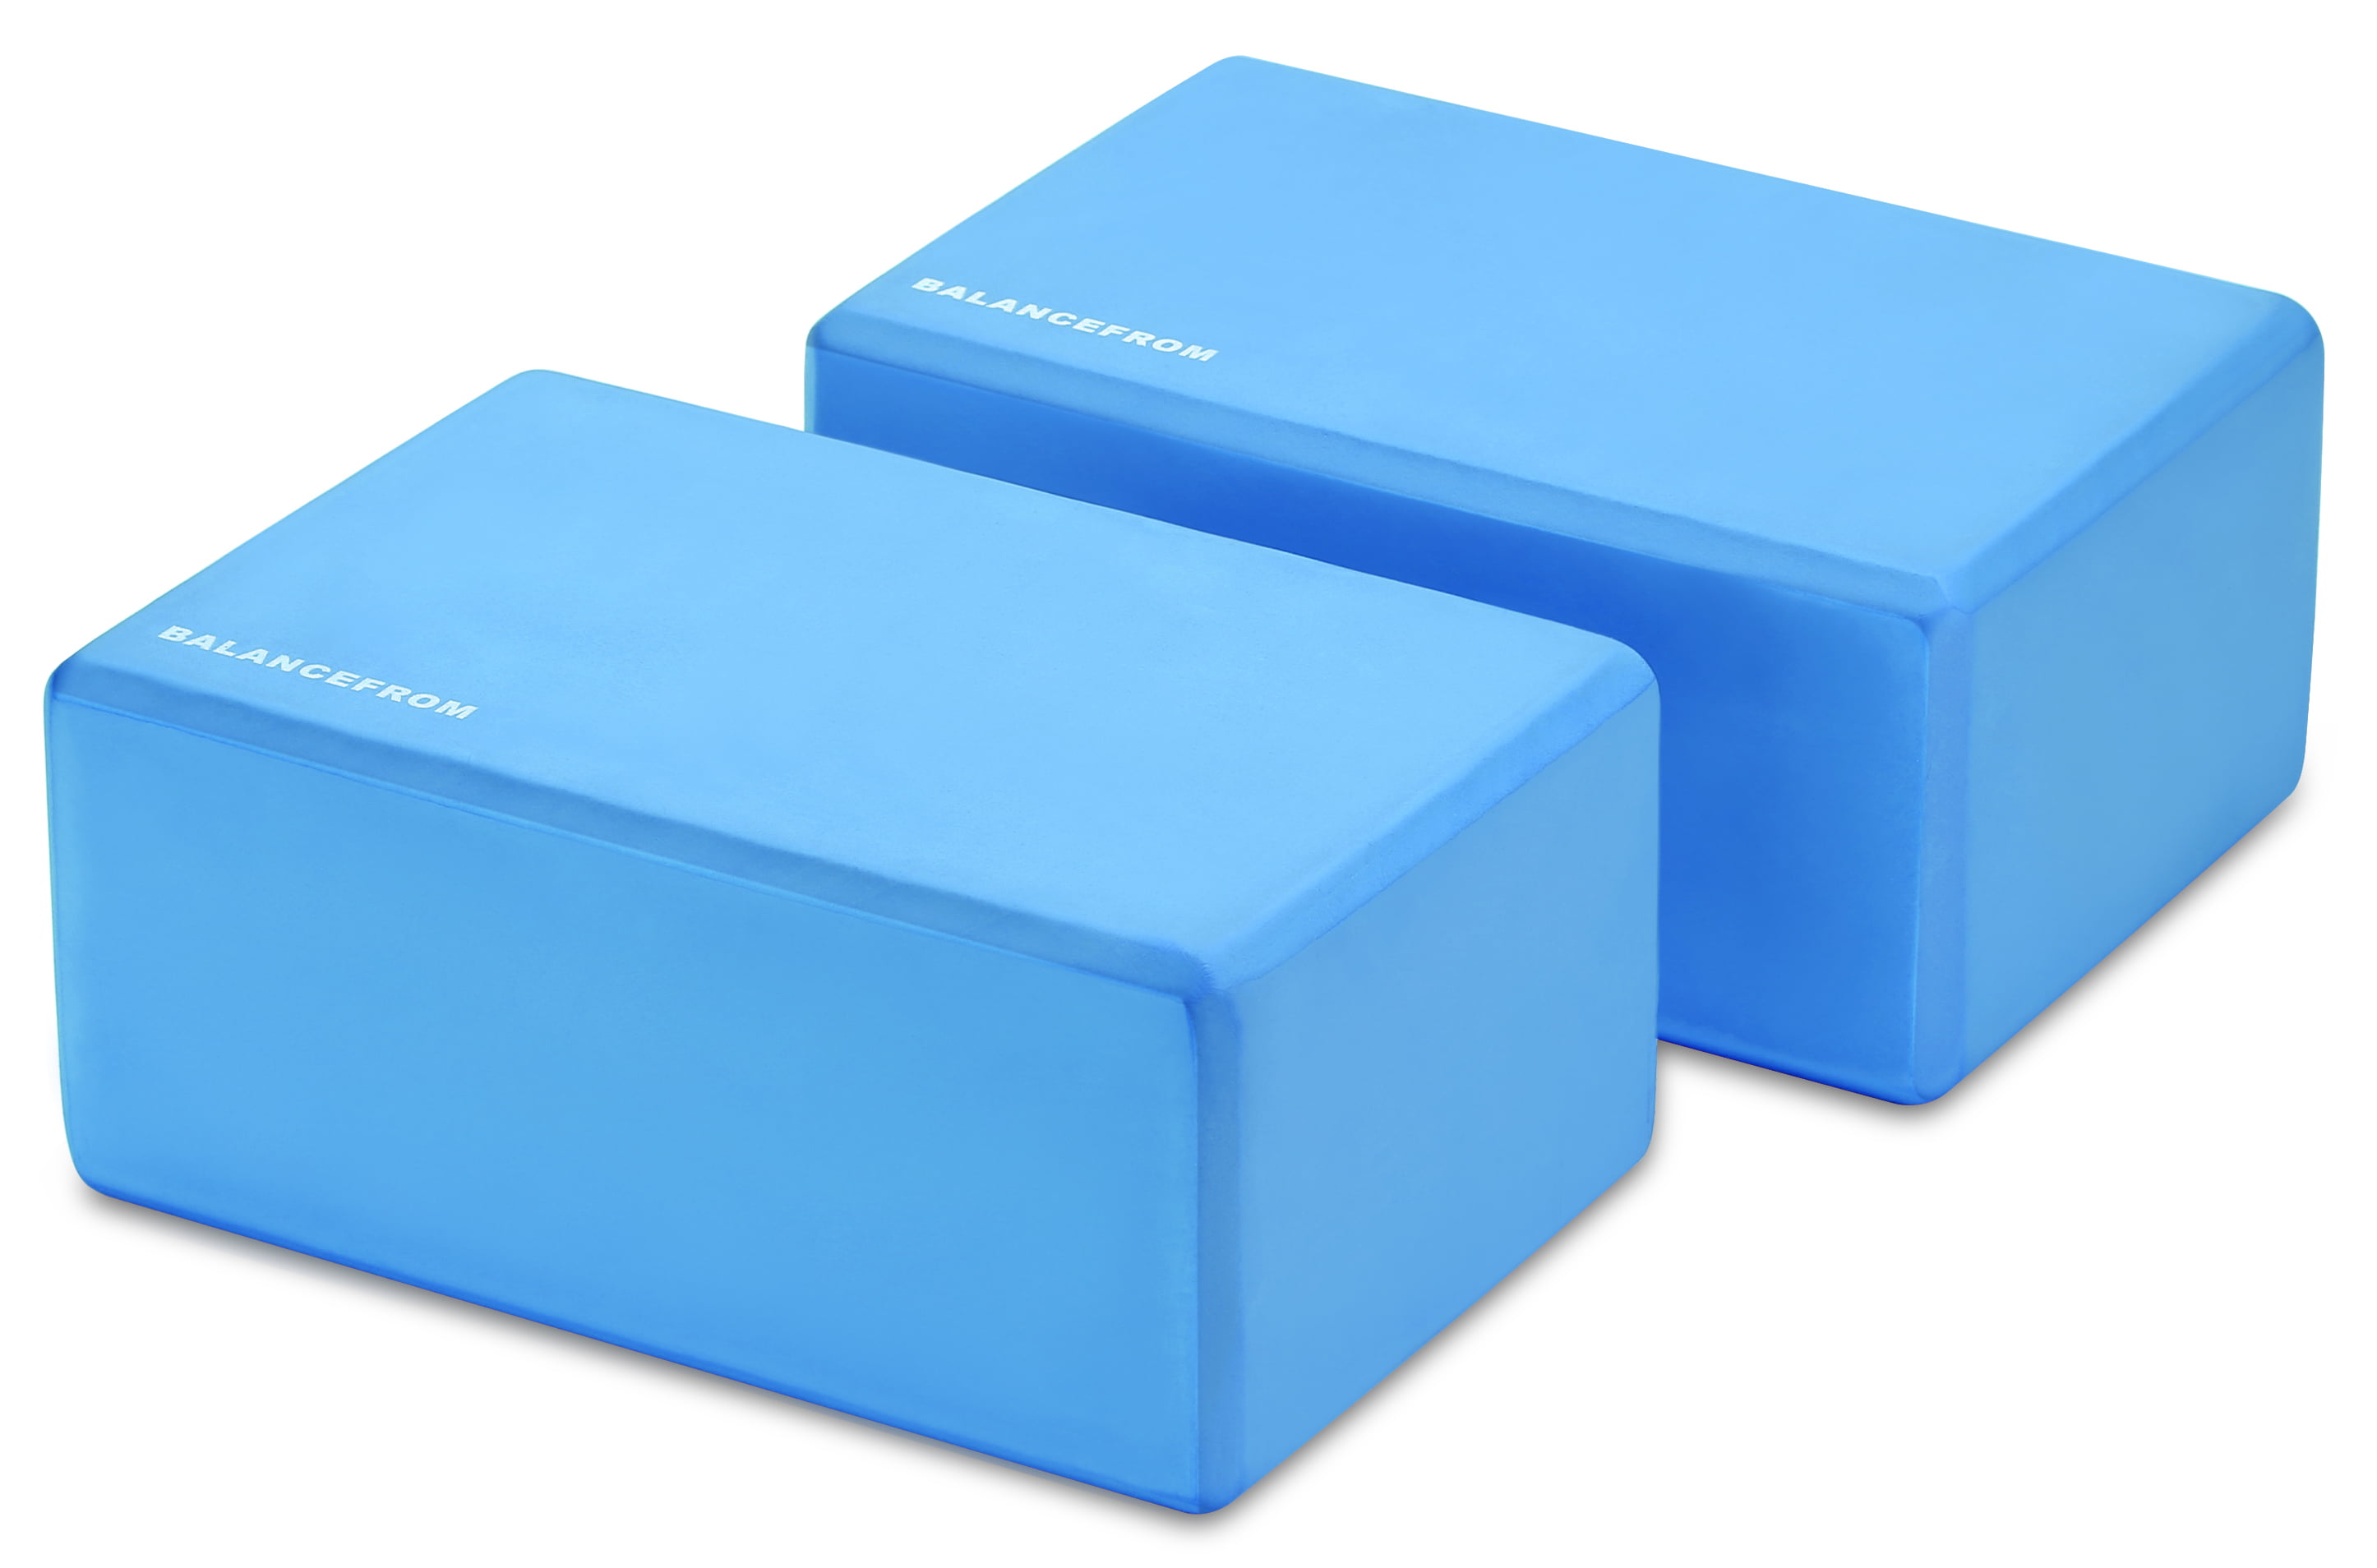 BalanceFrom Set of 2 High Density Yoga Blocks, 9 In. x 6 In. x 4 In. Each 